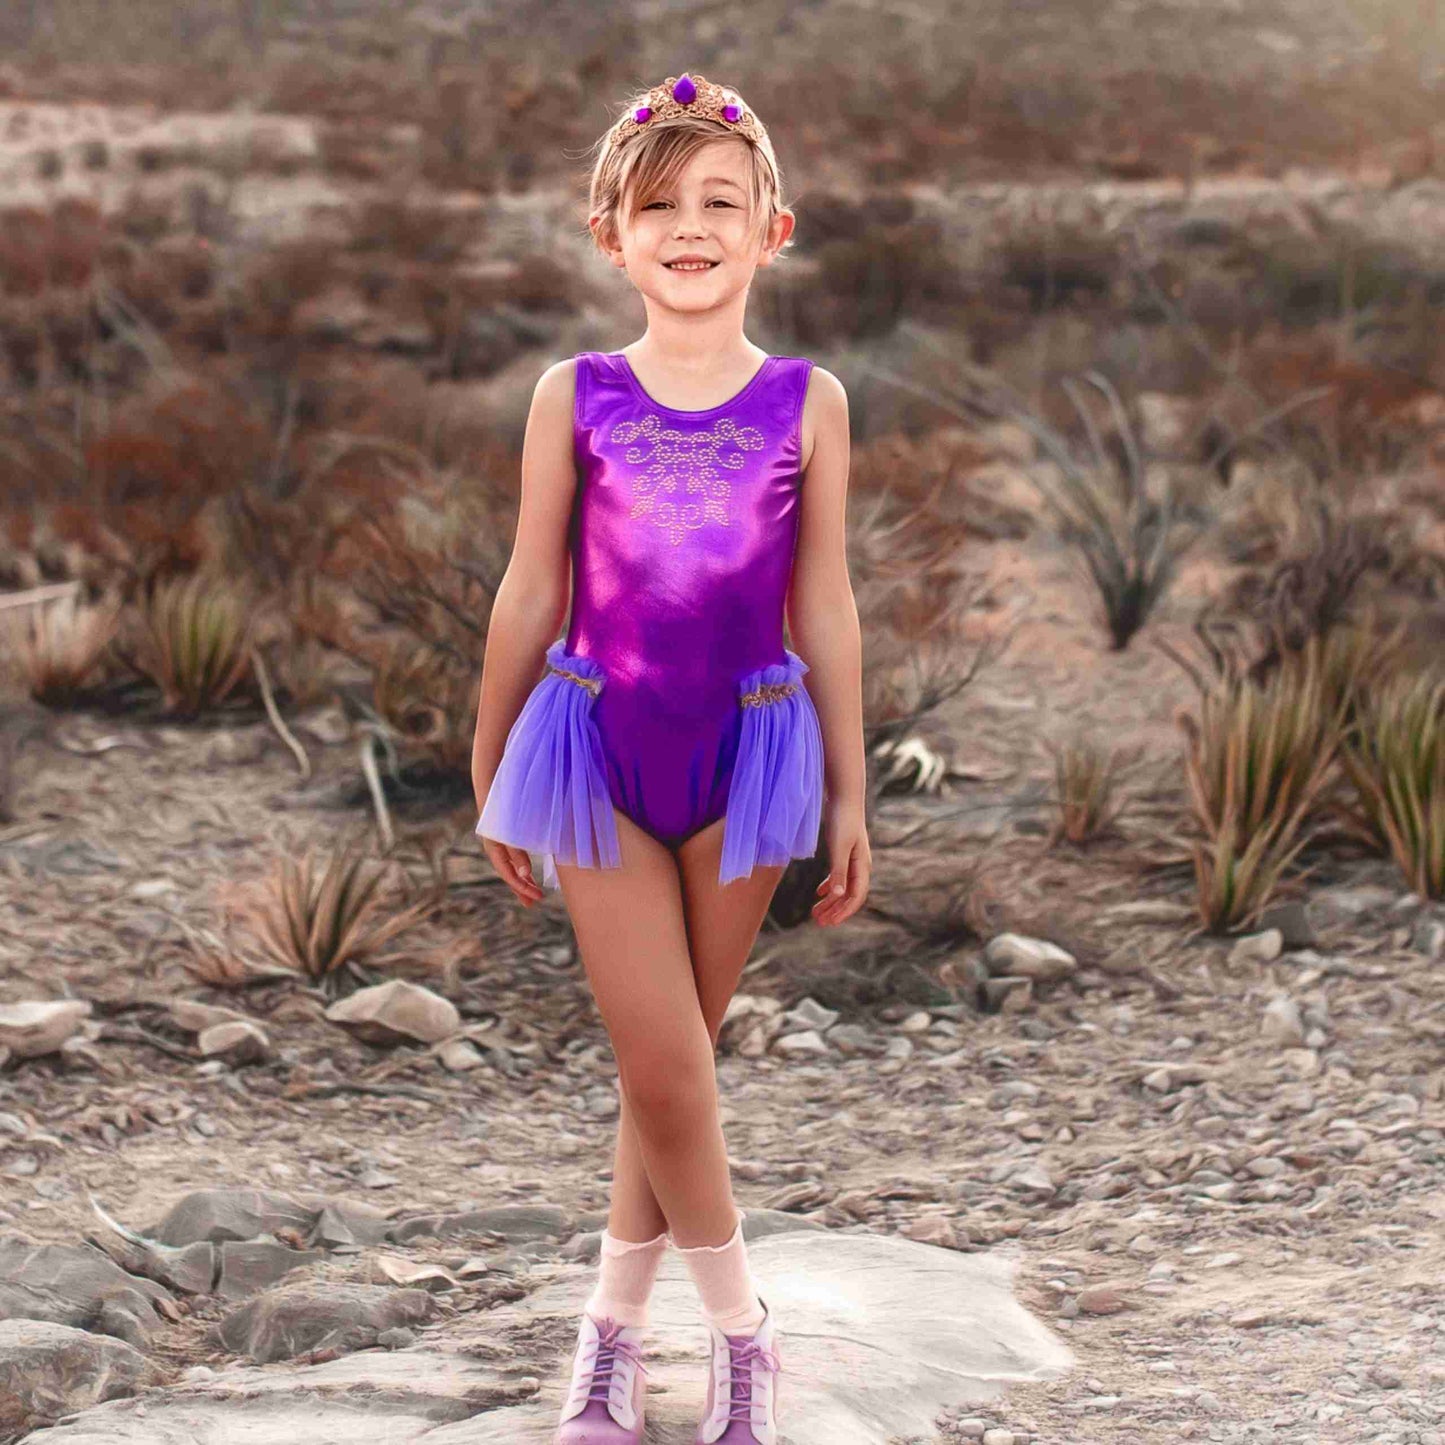 a little girl wearing a purple leotard and purple shoes